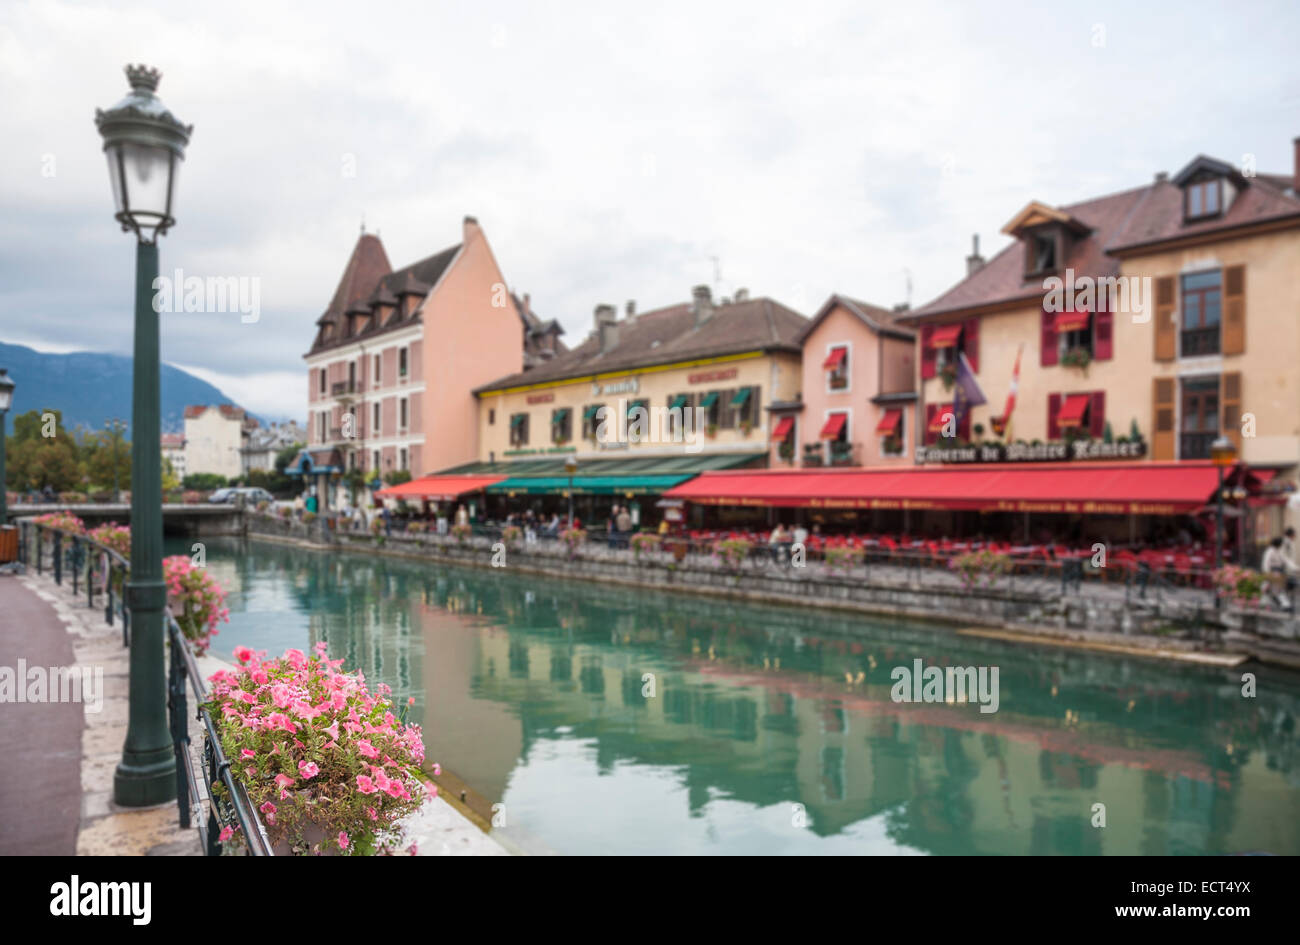 Pretty flower basket on the bank of the Thiou river, restaurants and colourful awnings on far side, old town, Annecy, France Stock Photo